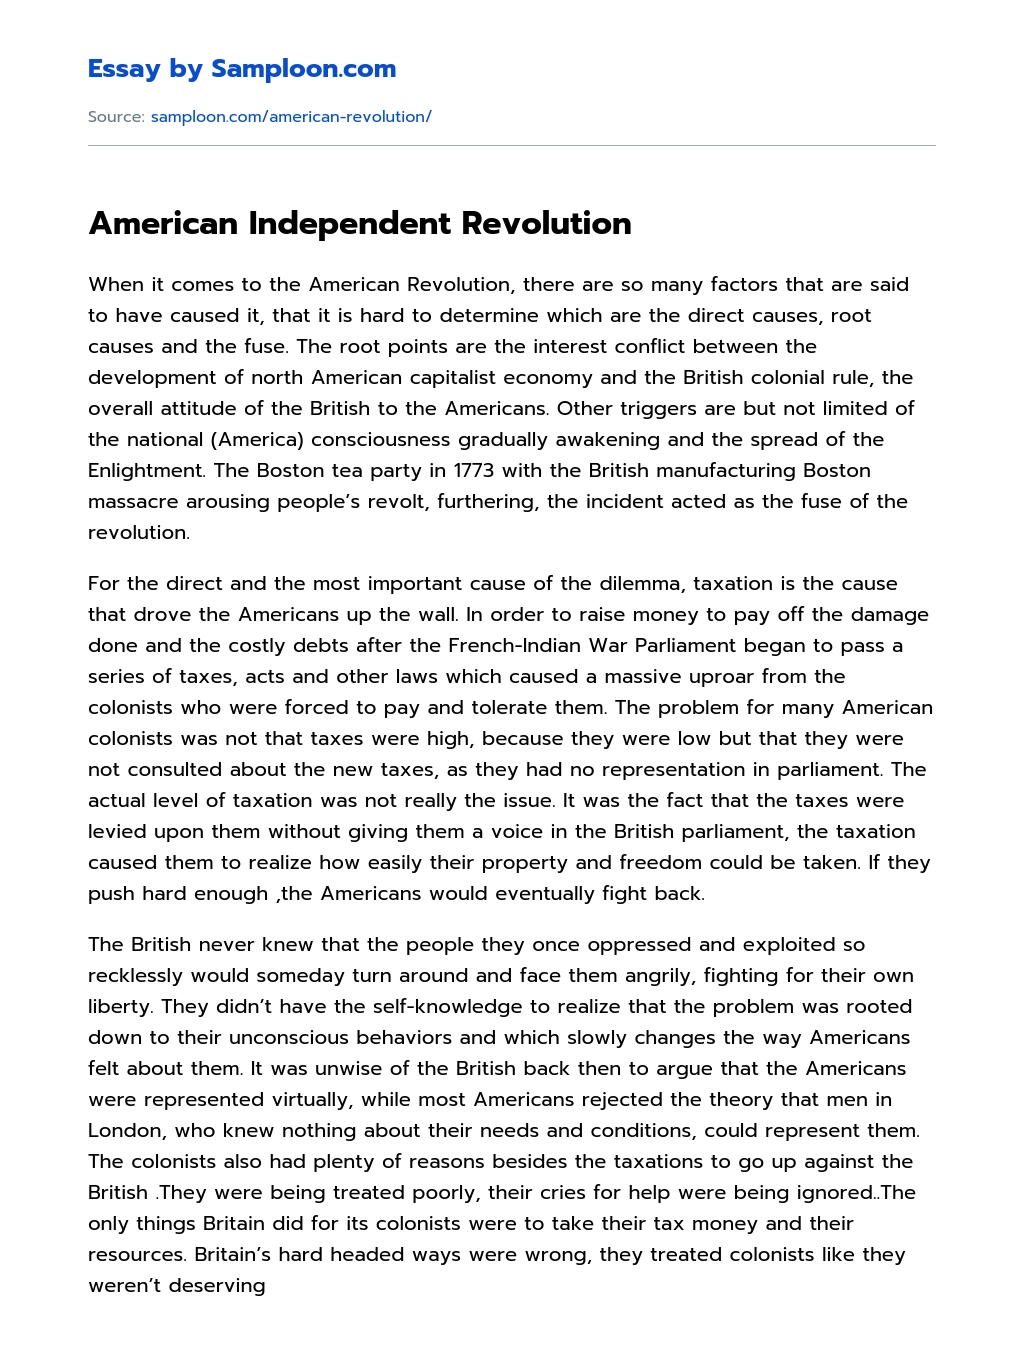 American Independent Revolution Review essay